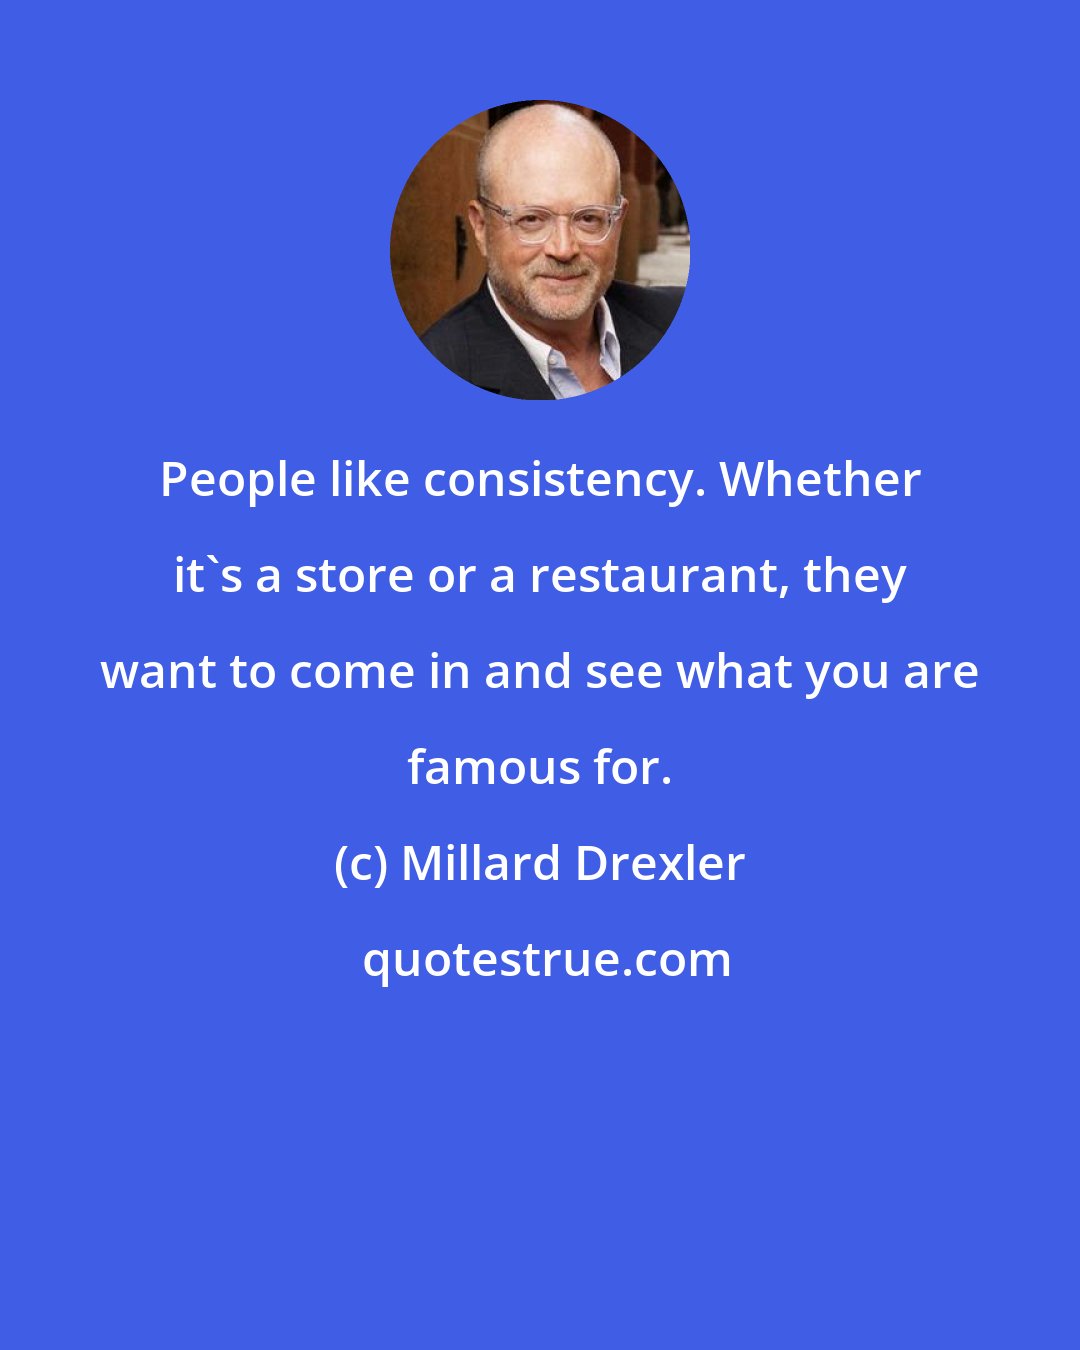 Millard Drexler: People like consistency. Whether it's a store or a restaurant, they want to come in and see what you are famous for.